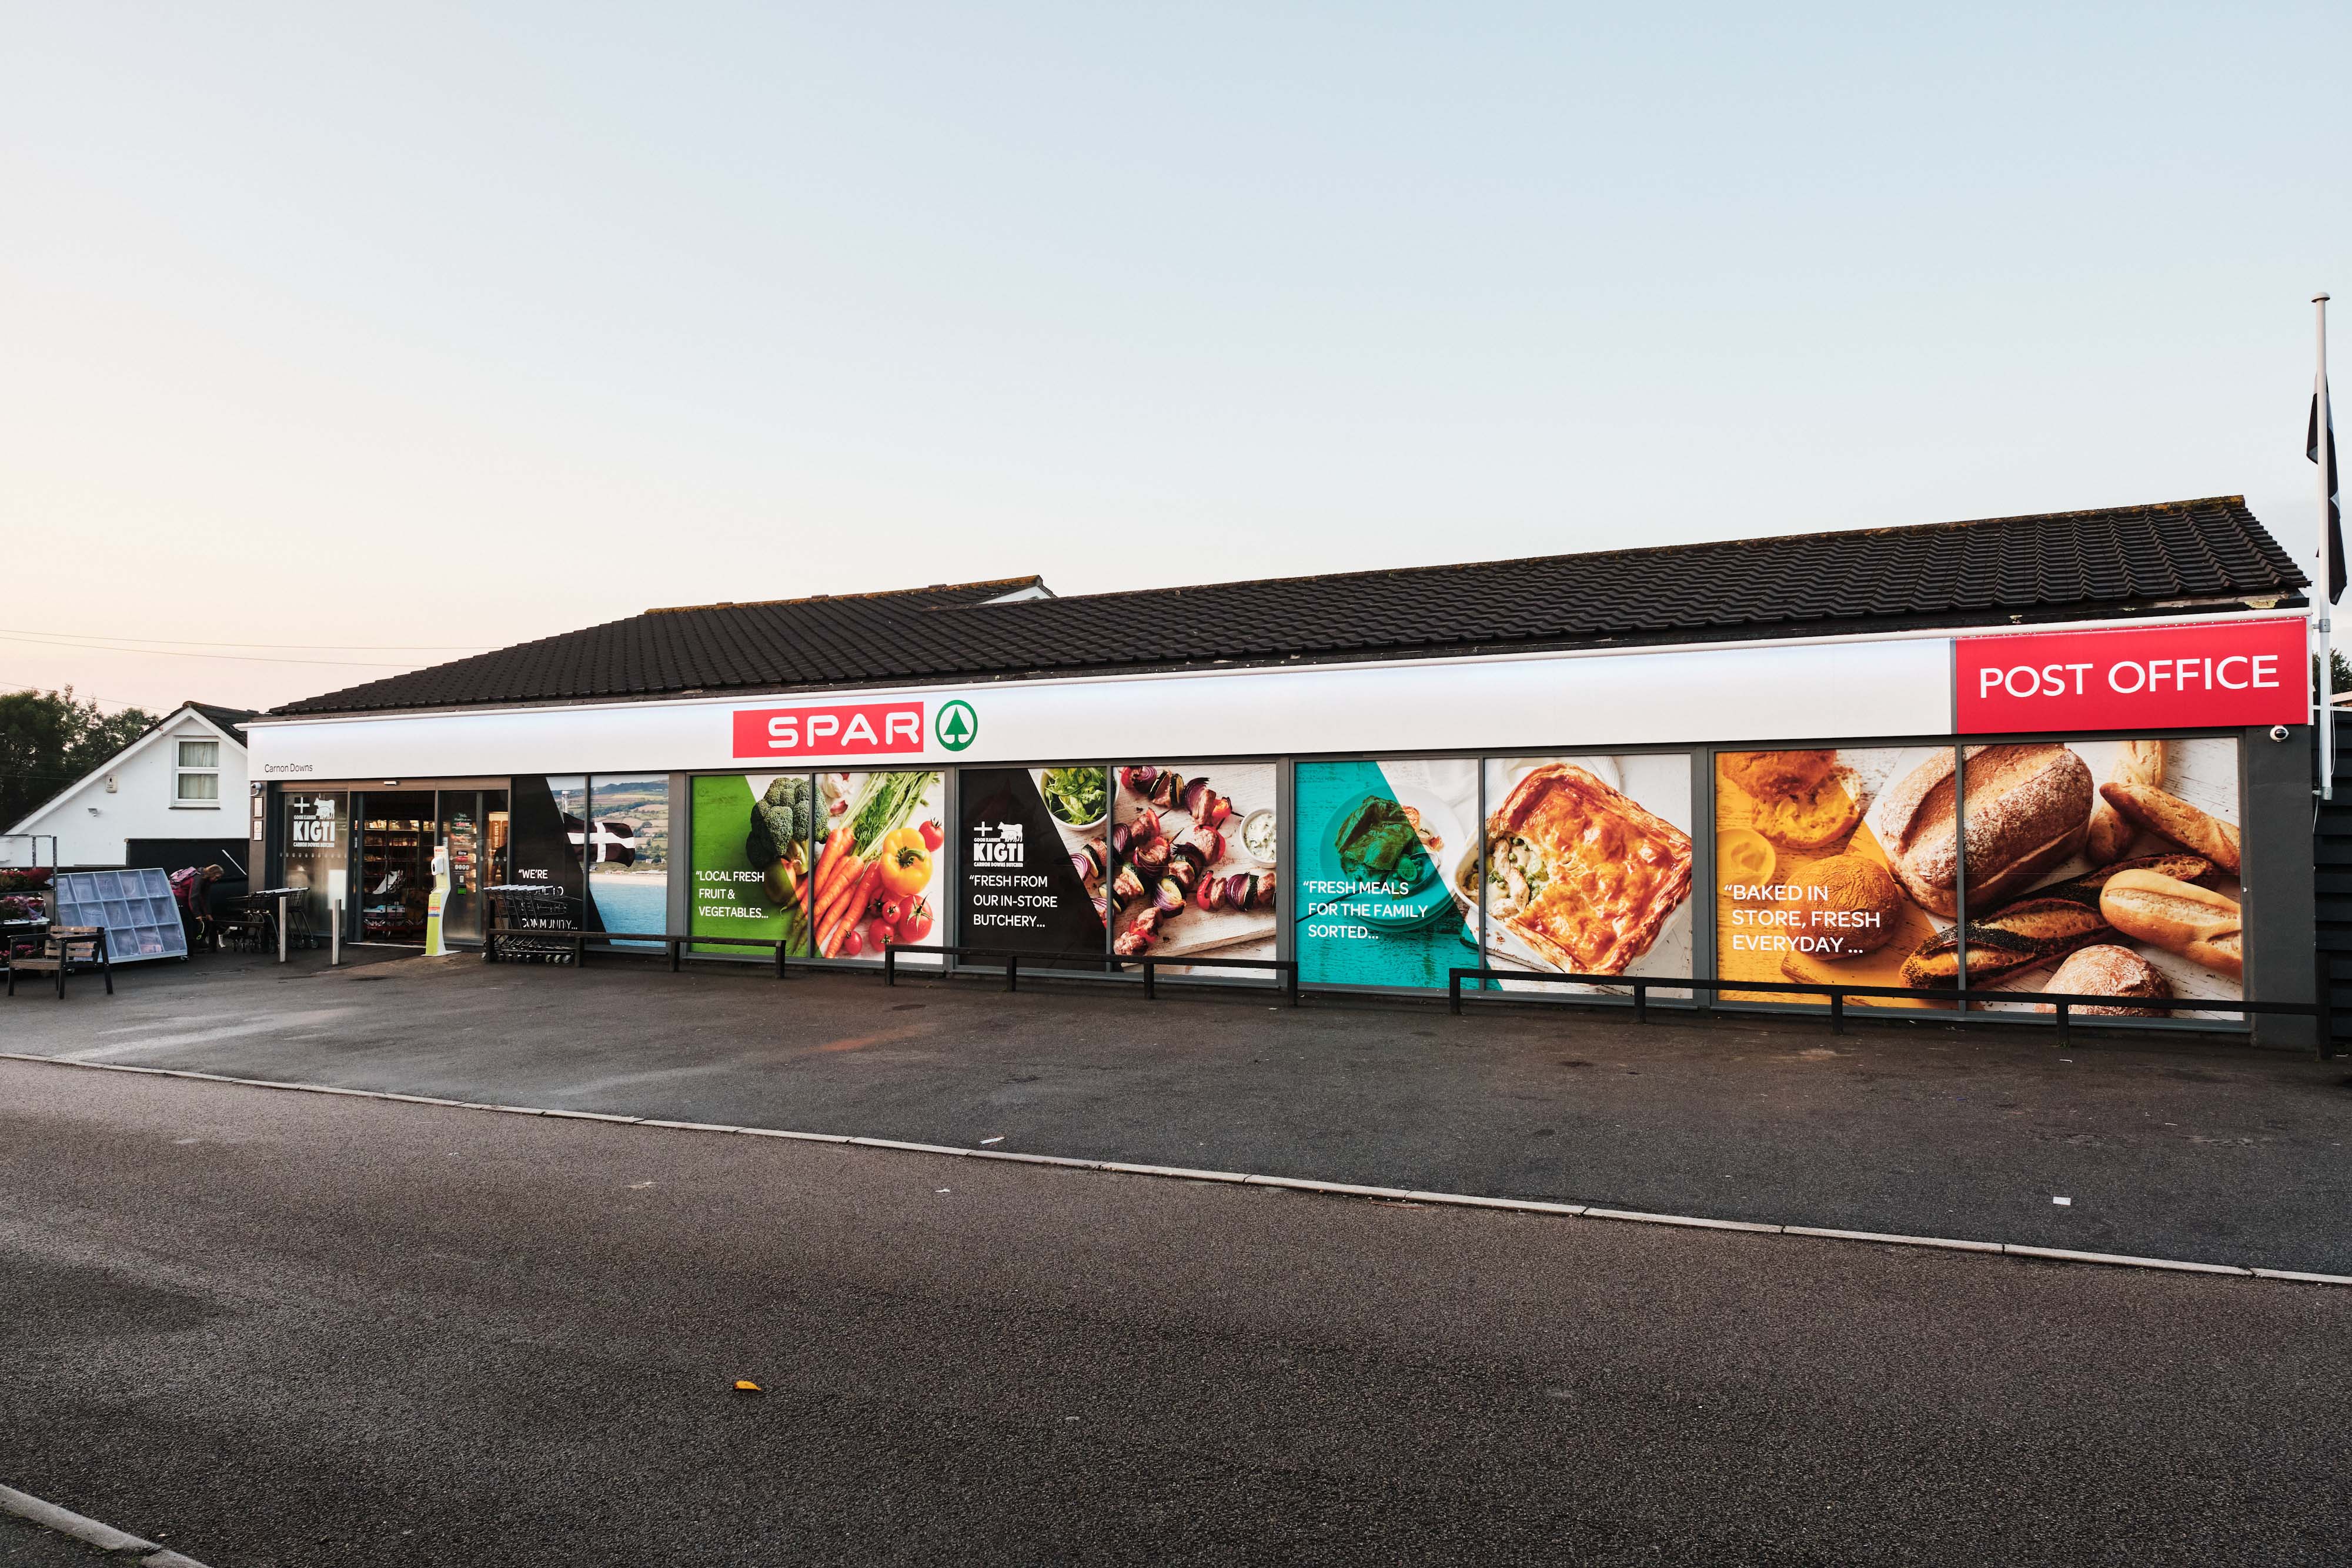 SPAR launches new partnership with Deliveroo